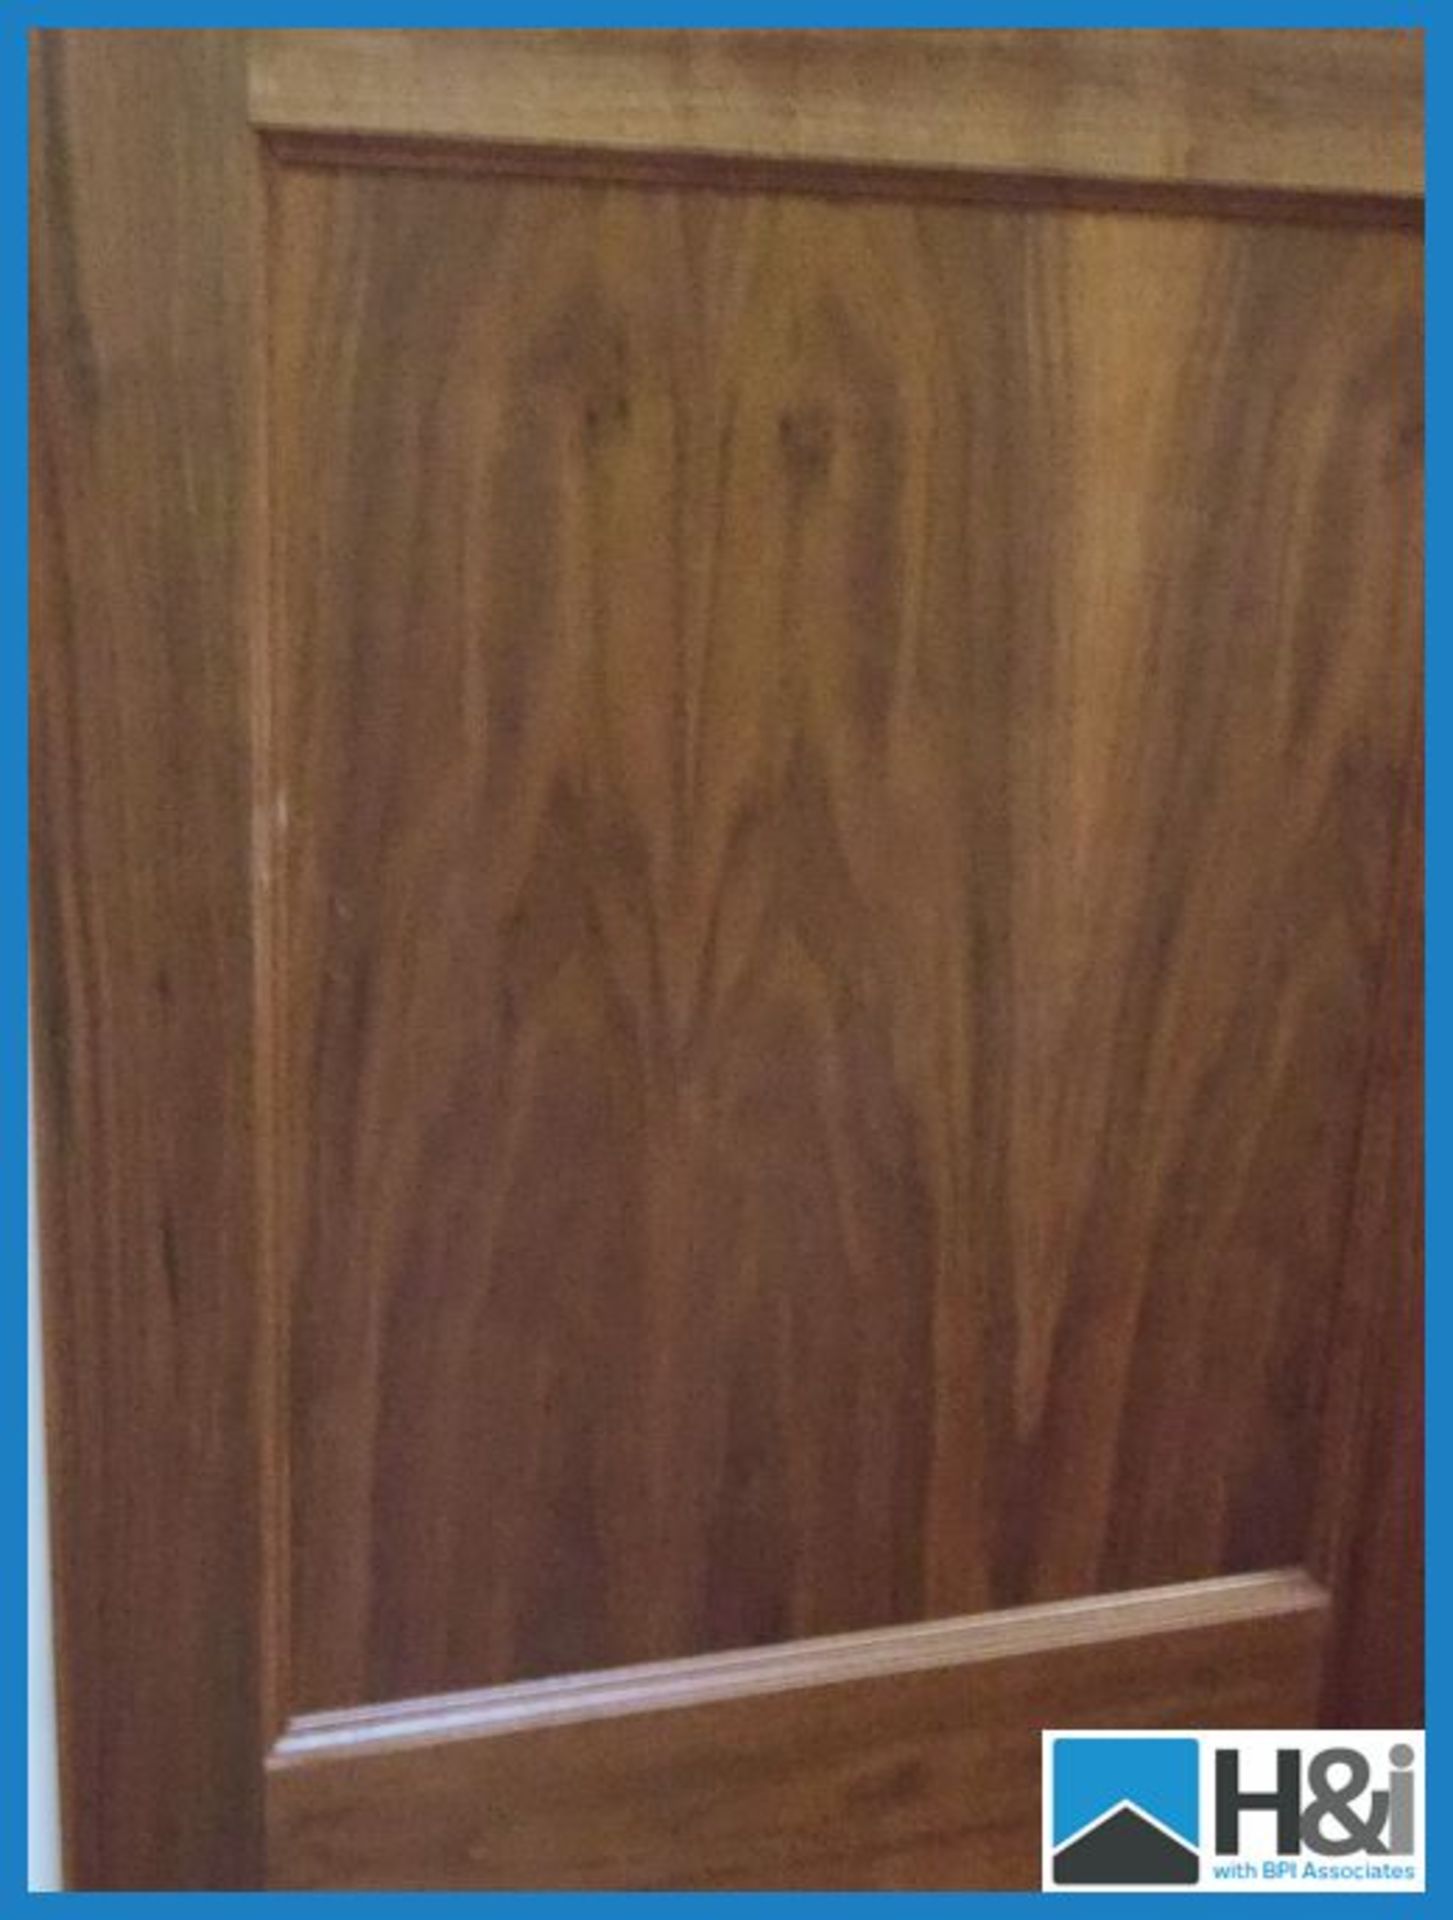 Brand new in sealed packaging Walnut 'Arden' exterior door 78" x 33" 44mm thickness with two flat - Image 2 of 3